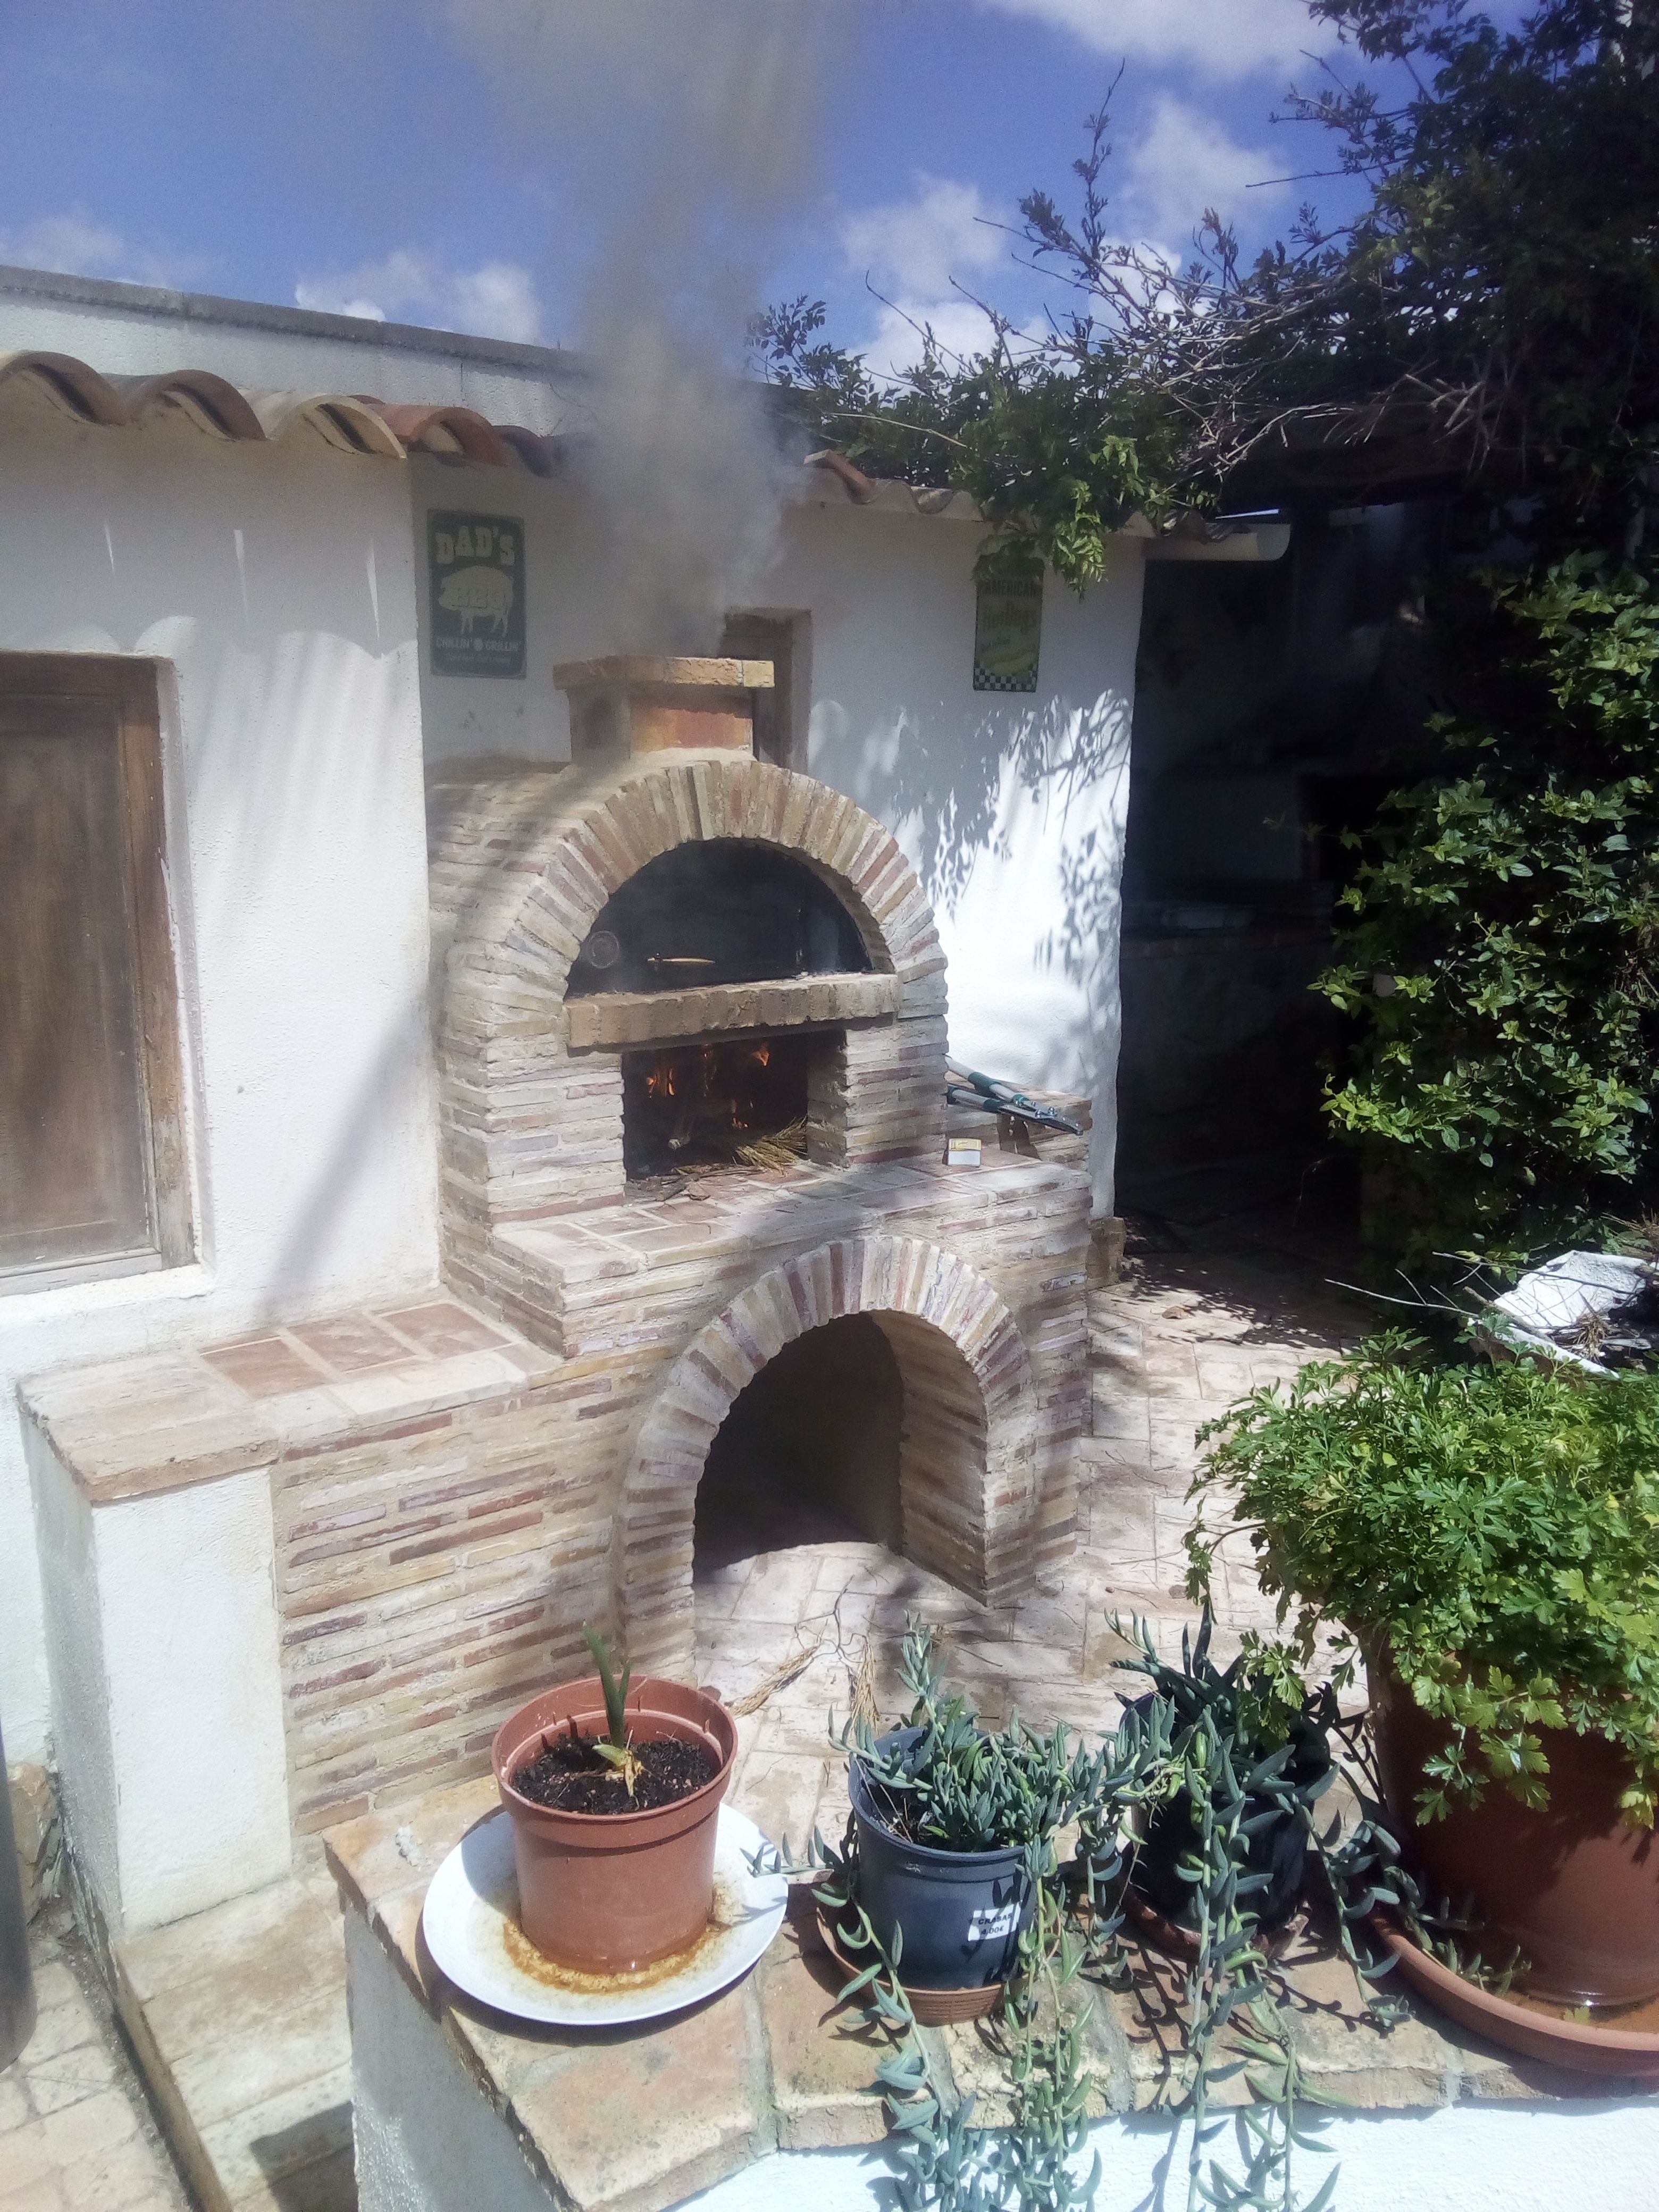 Three Easy Steps for Cleaning Your Wood Fired Pizza Oven